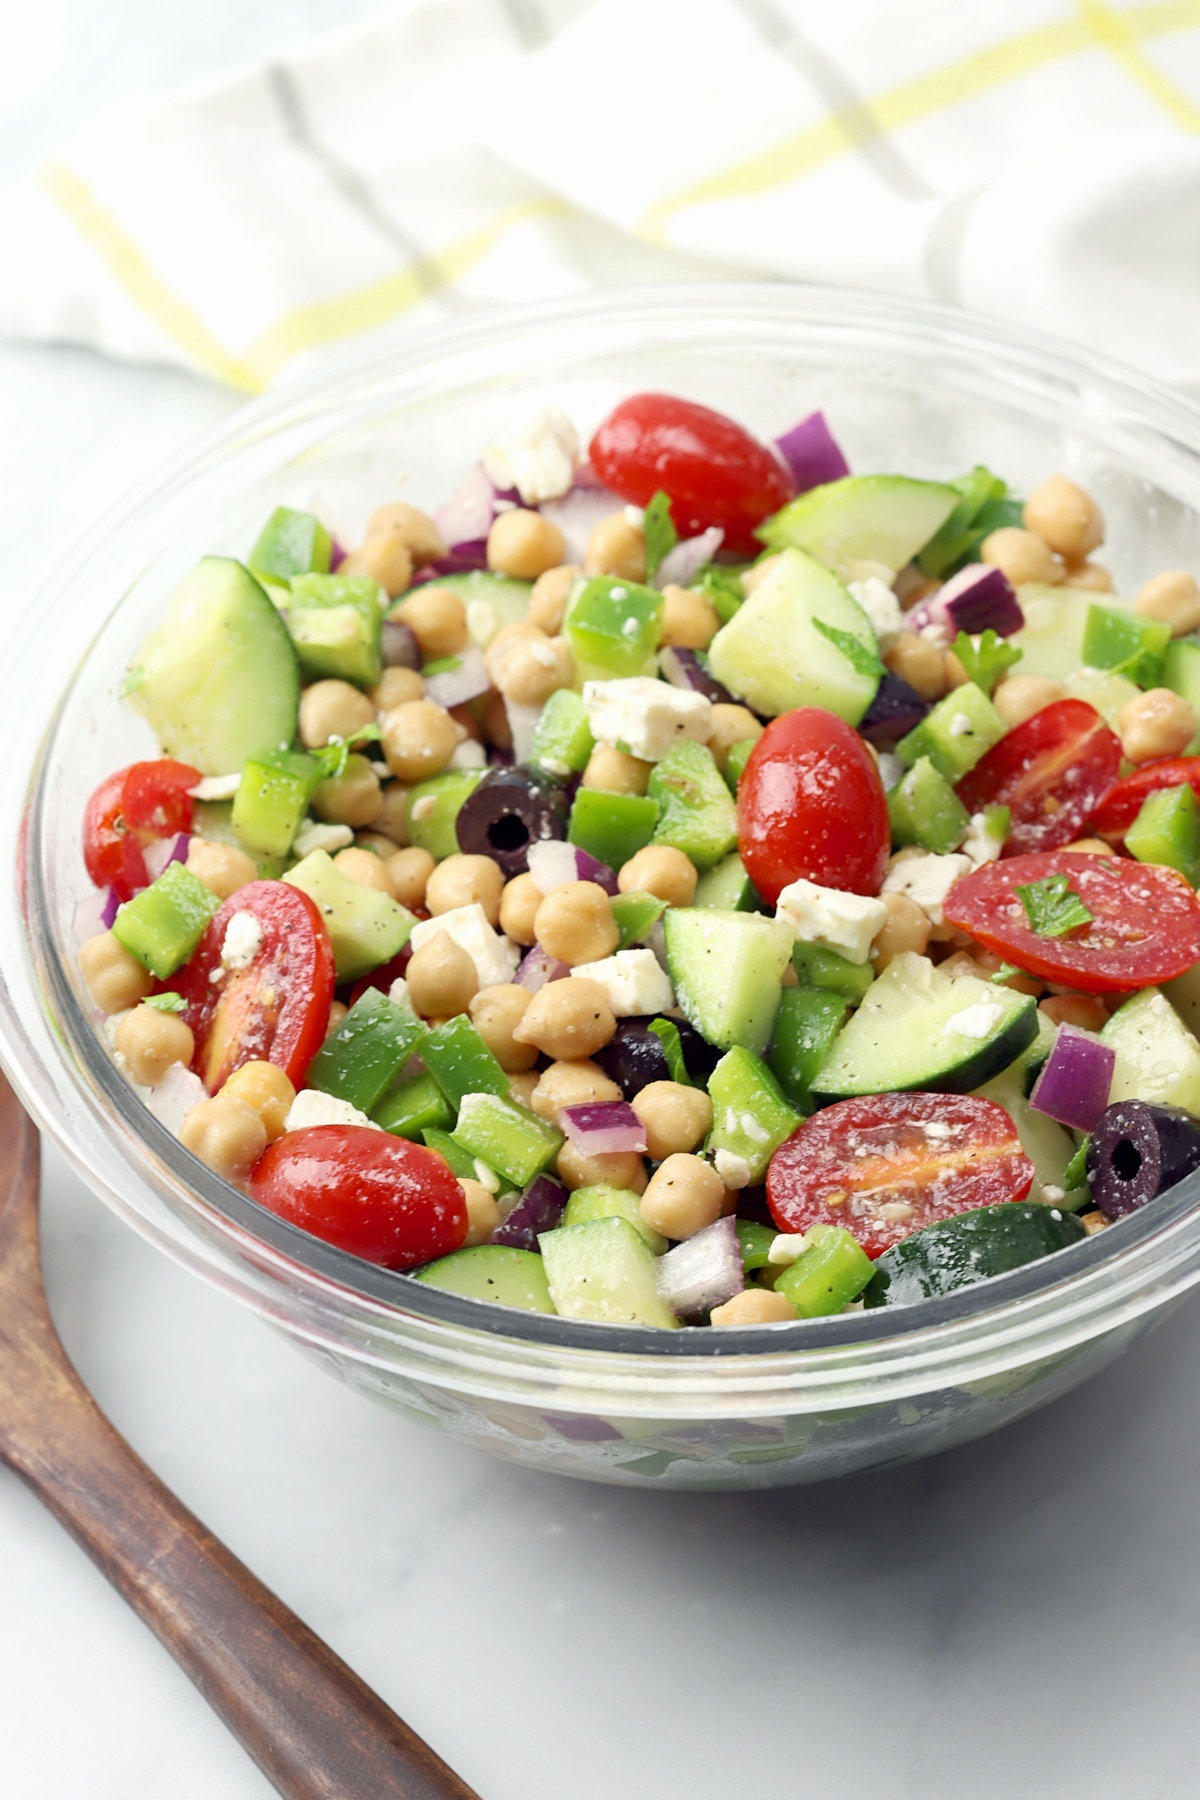 Chickpea salad with cucumbers, olives, and tomatoes.